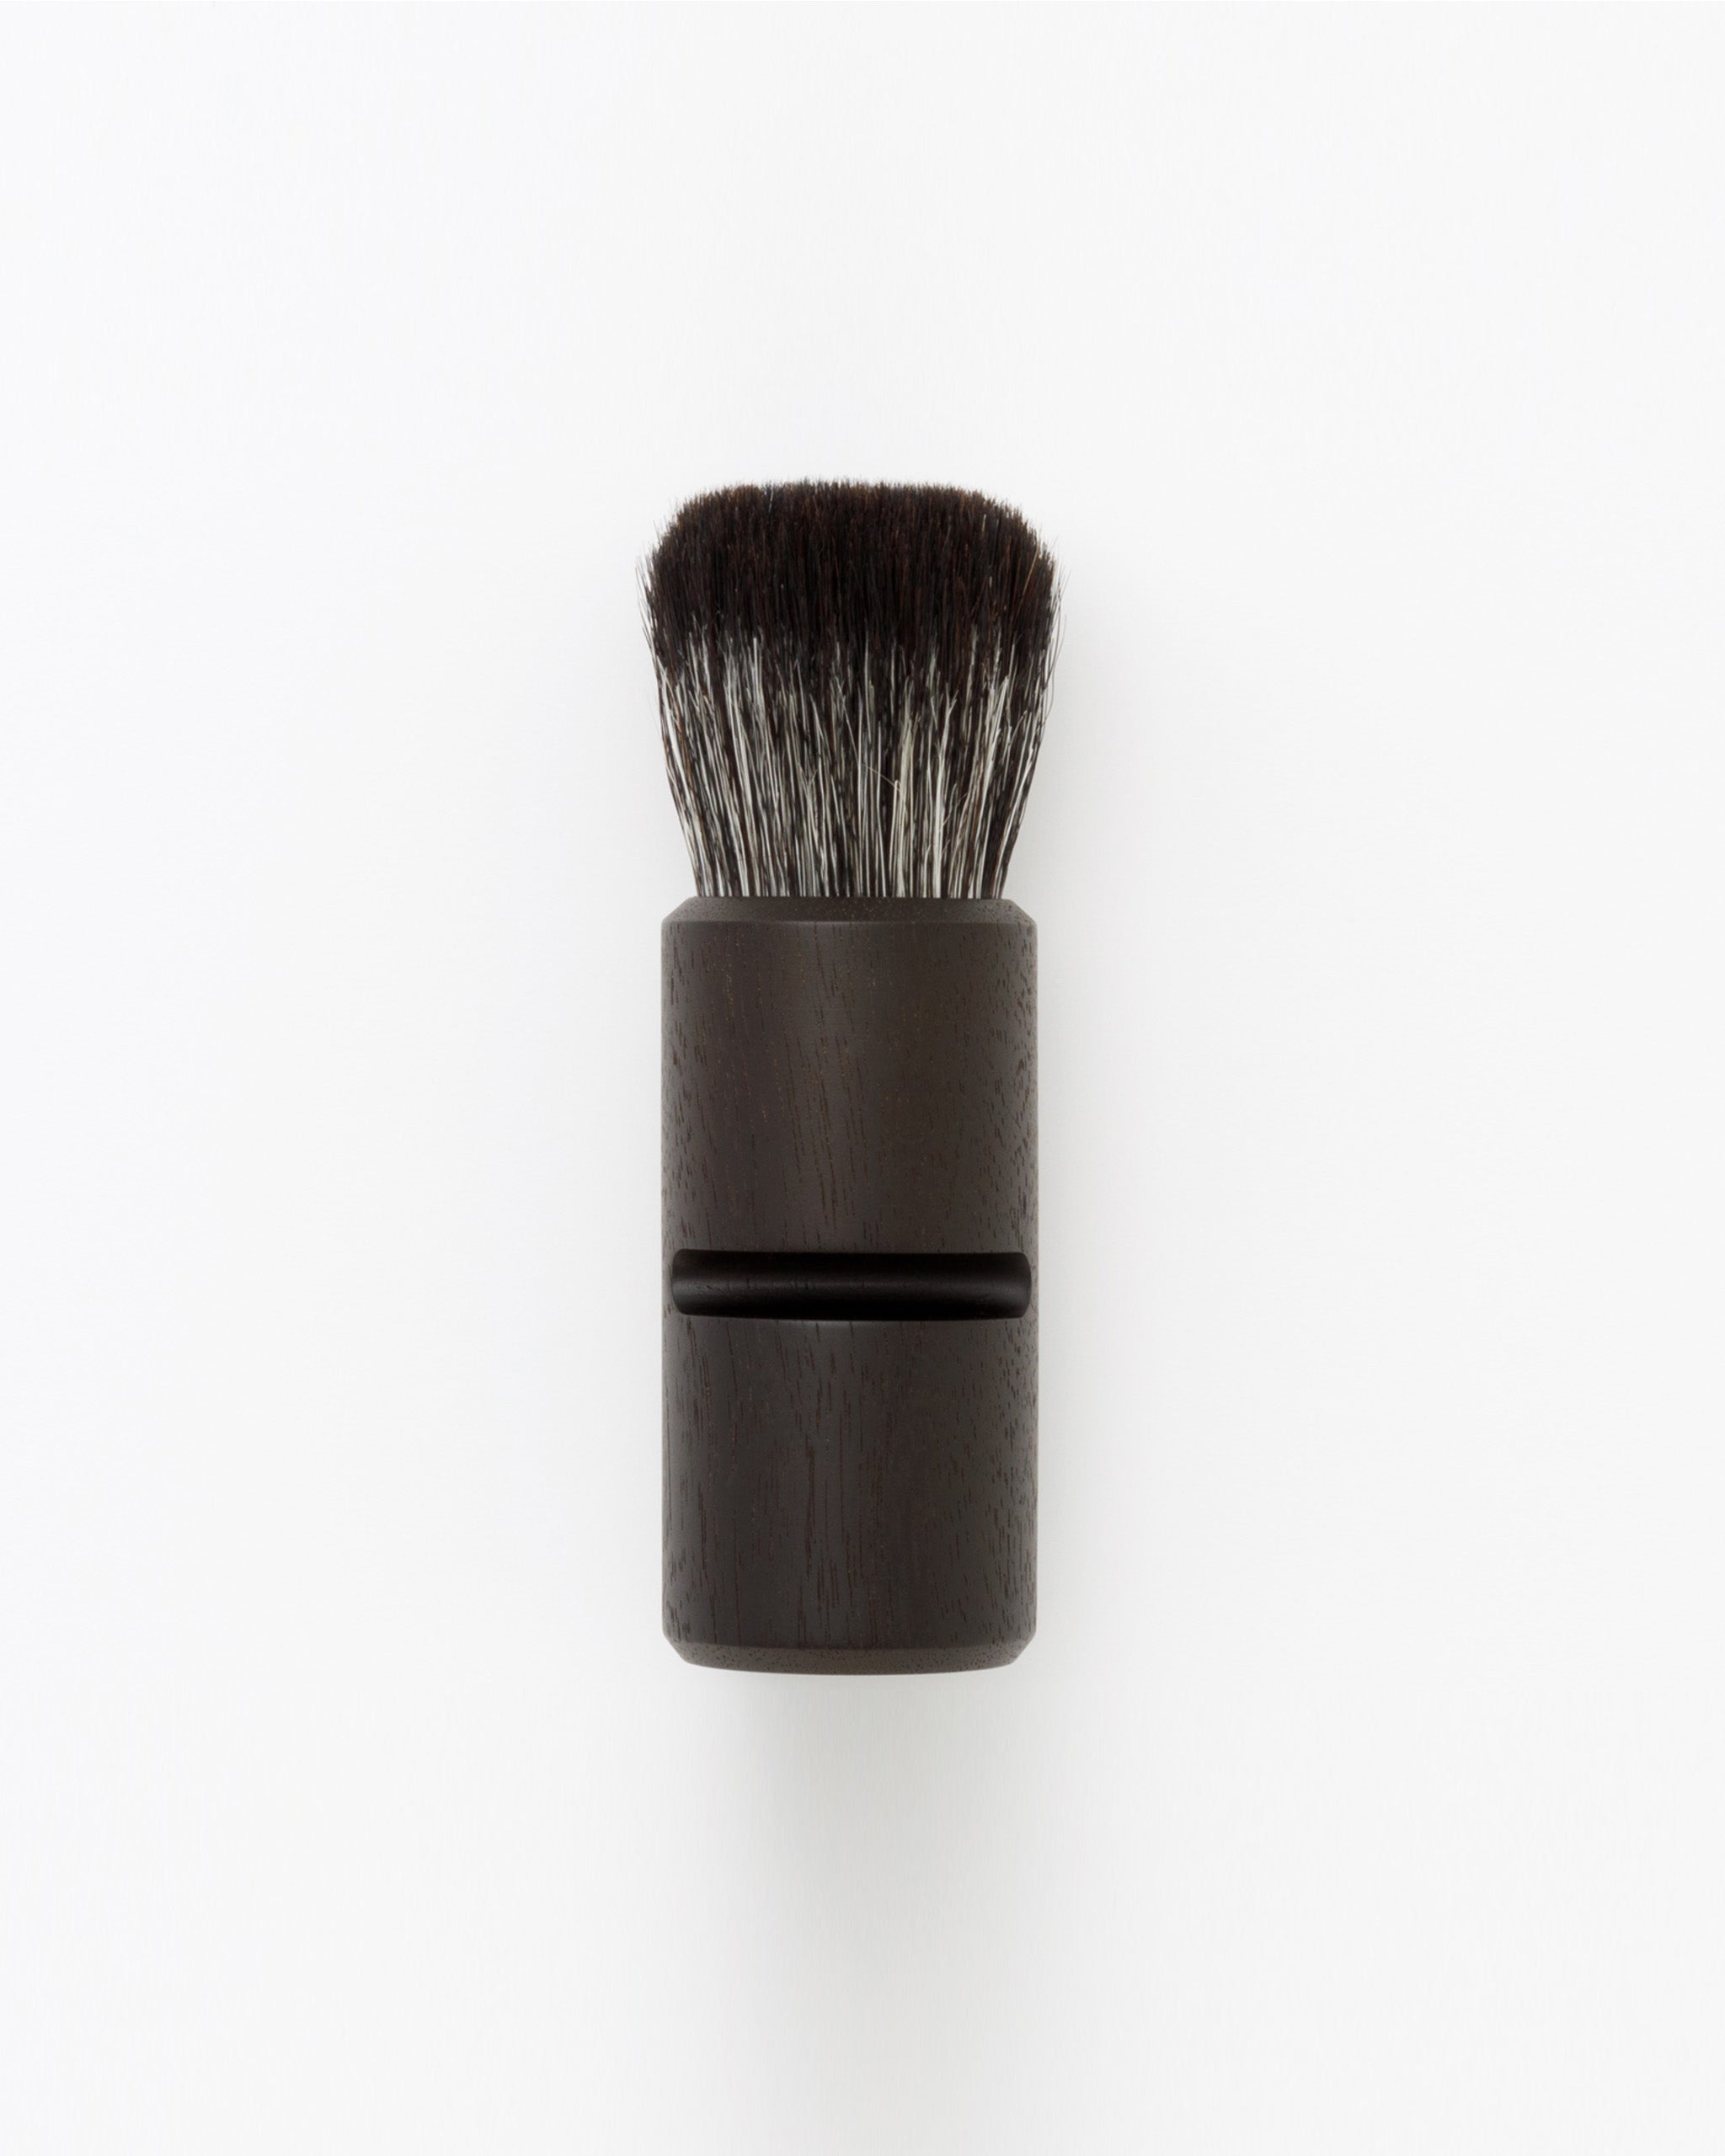 Silhouetted image of hard Jiva face cleansing and shaving series walnut, boar bristle, and goat hair brush by Shaquda against white-gray background.